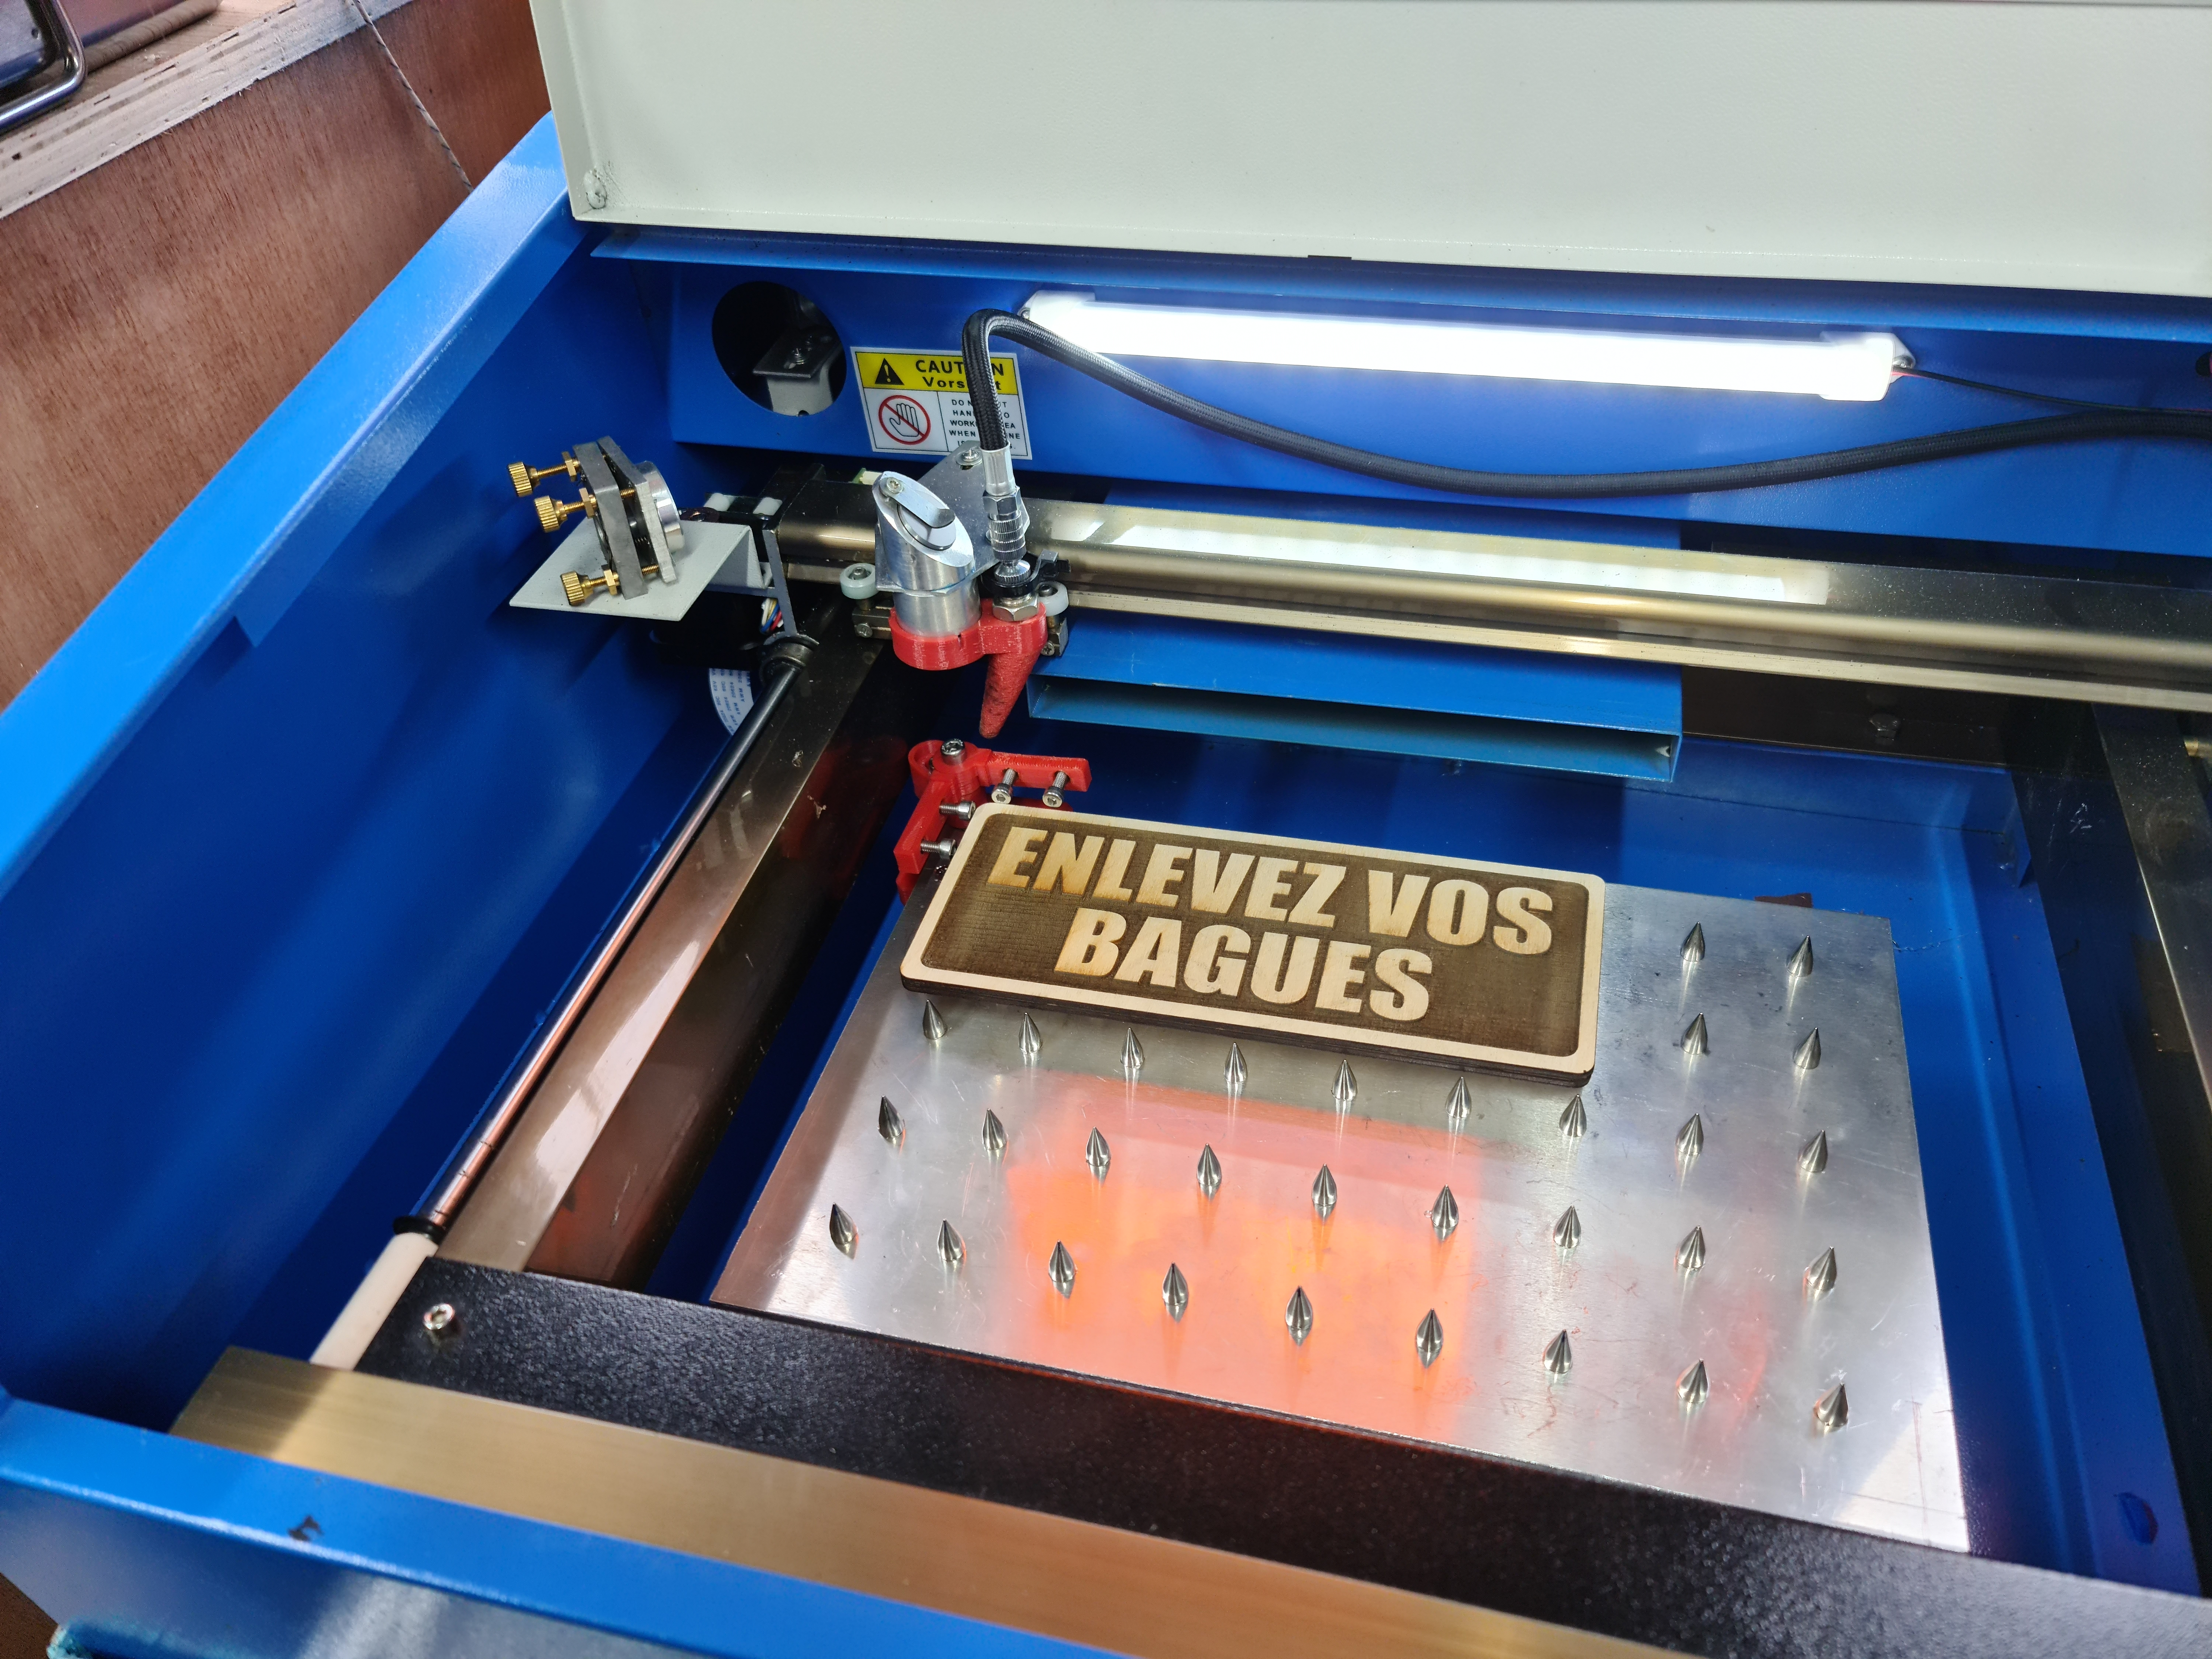 Upgrade your laser cutter with an adjustable bed